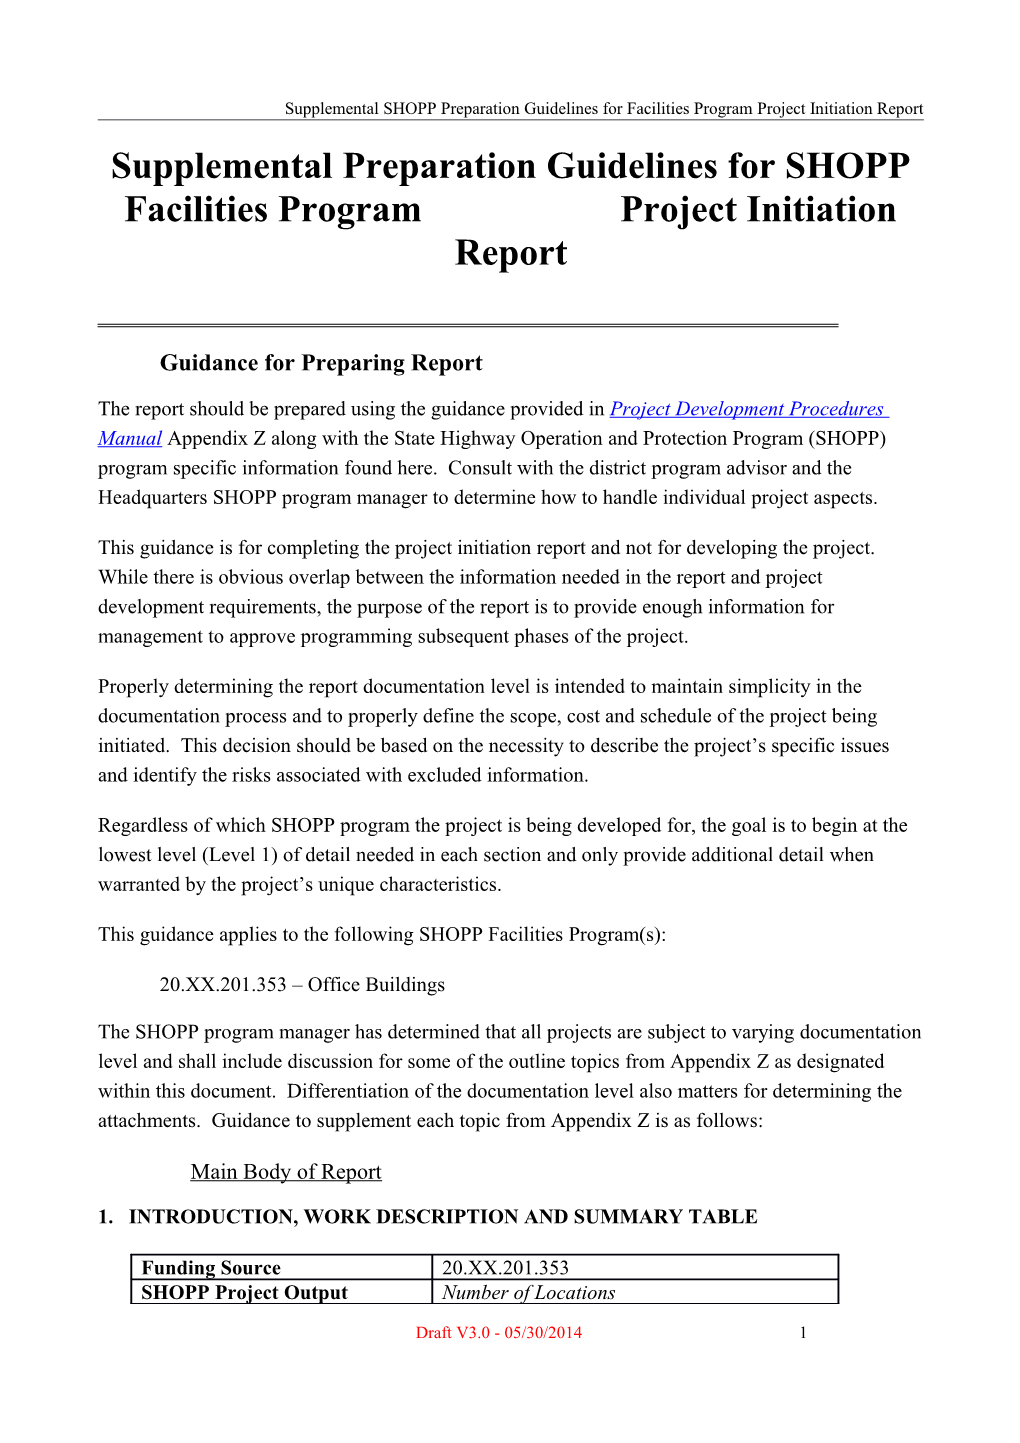 Supplemental Preparation Guidelines for SHOPP Facilities Program Project Initiation Report